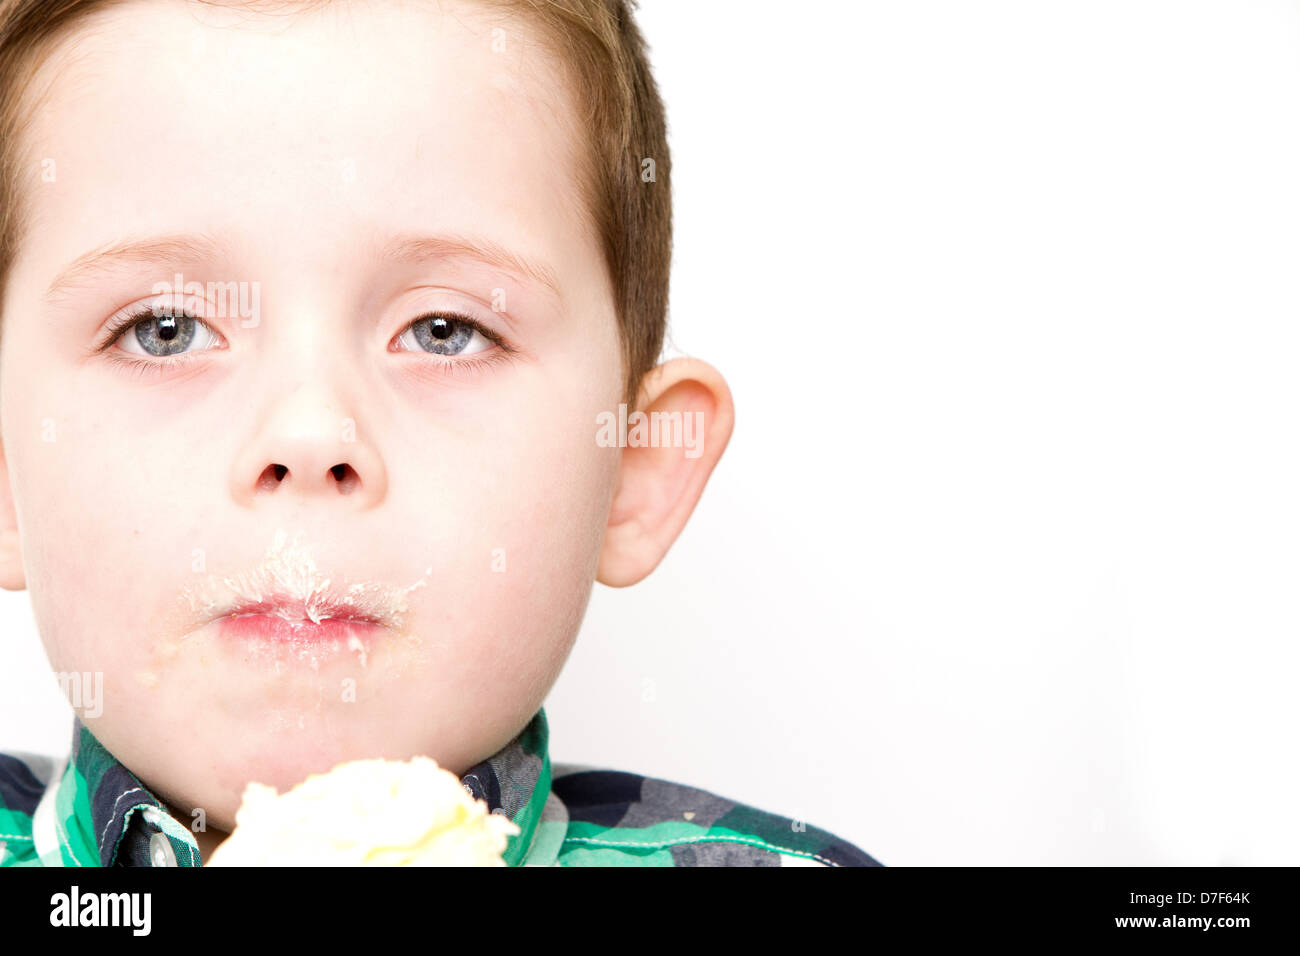 Small boy eating a cake Stock Photo